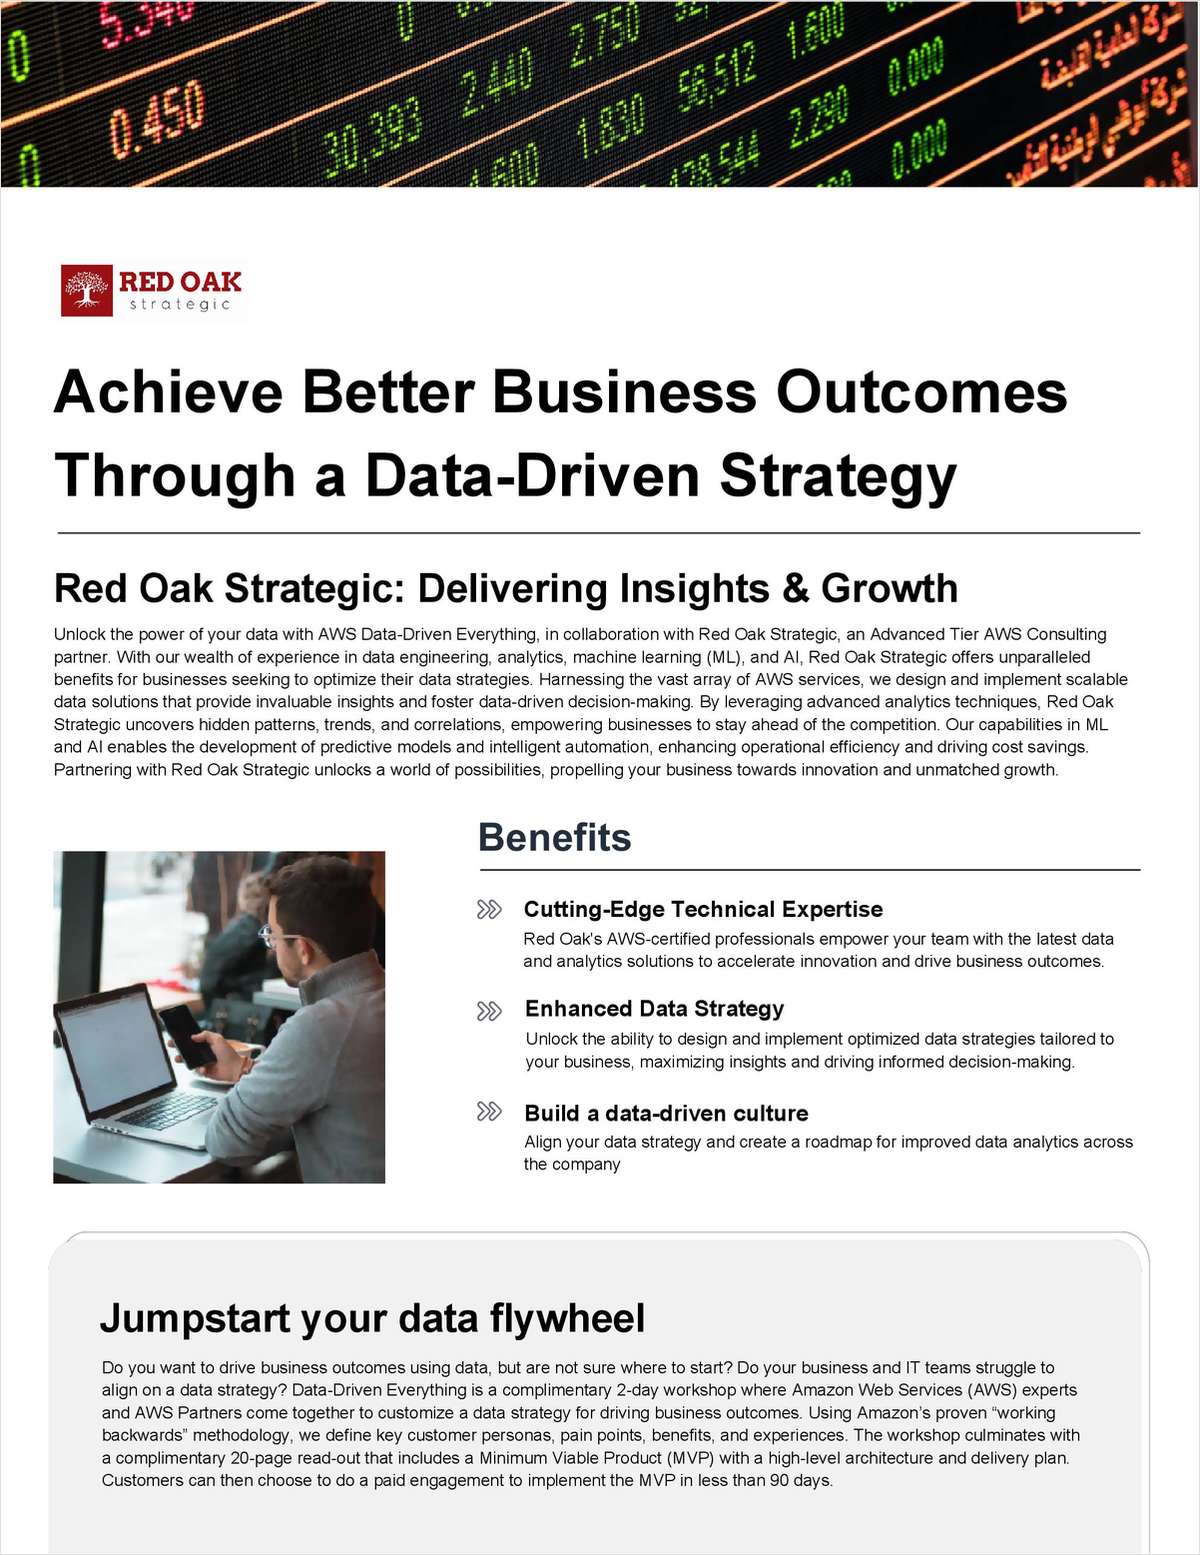 Jumpstart Your Data Flywheel and Achieve Better Business Outcomes